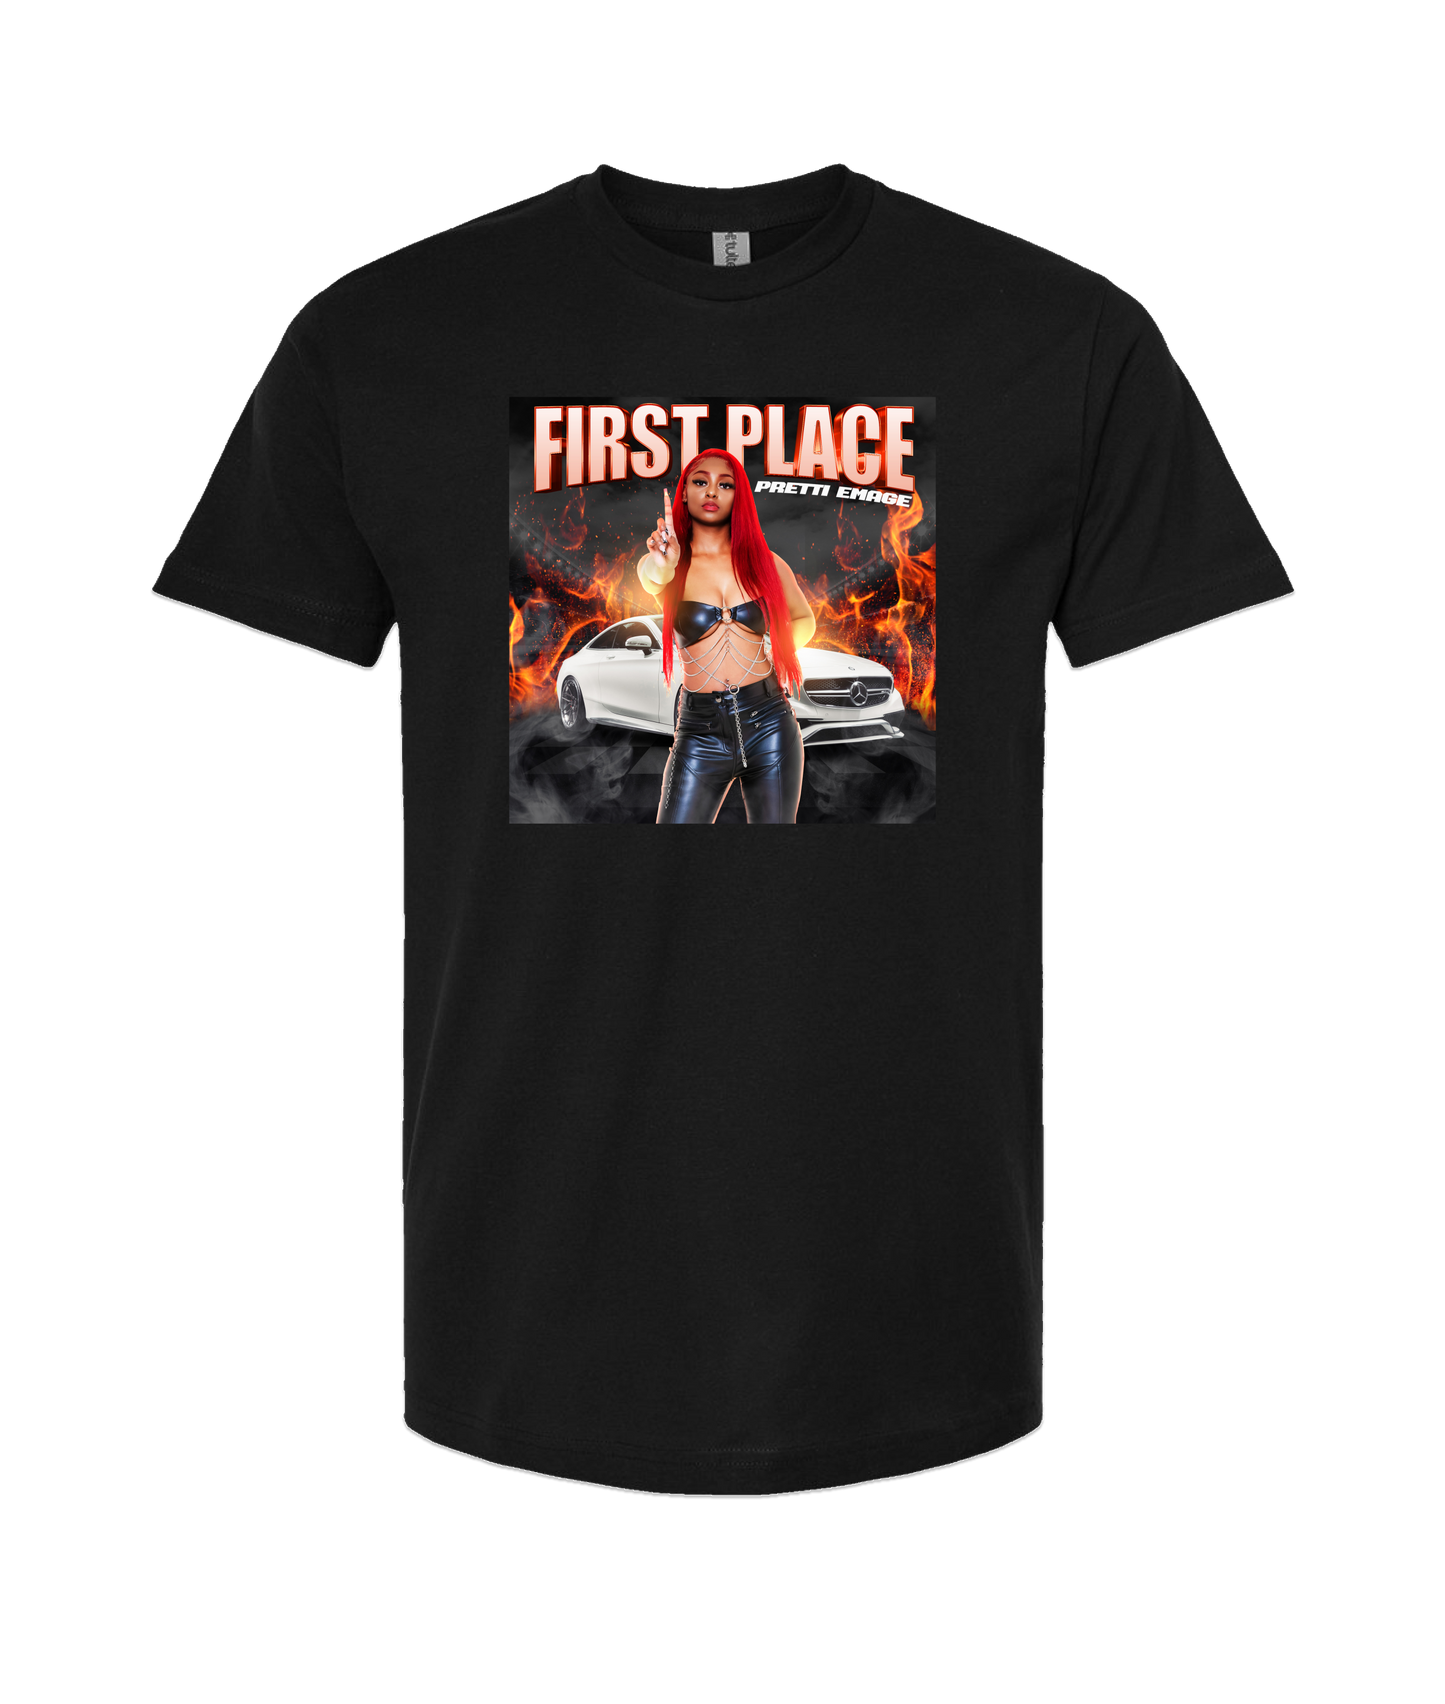 Pretti Emage - First Place - Black T Shirt